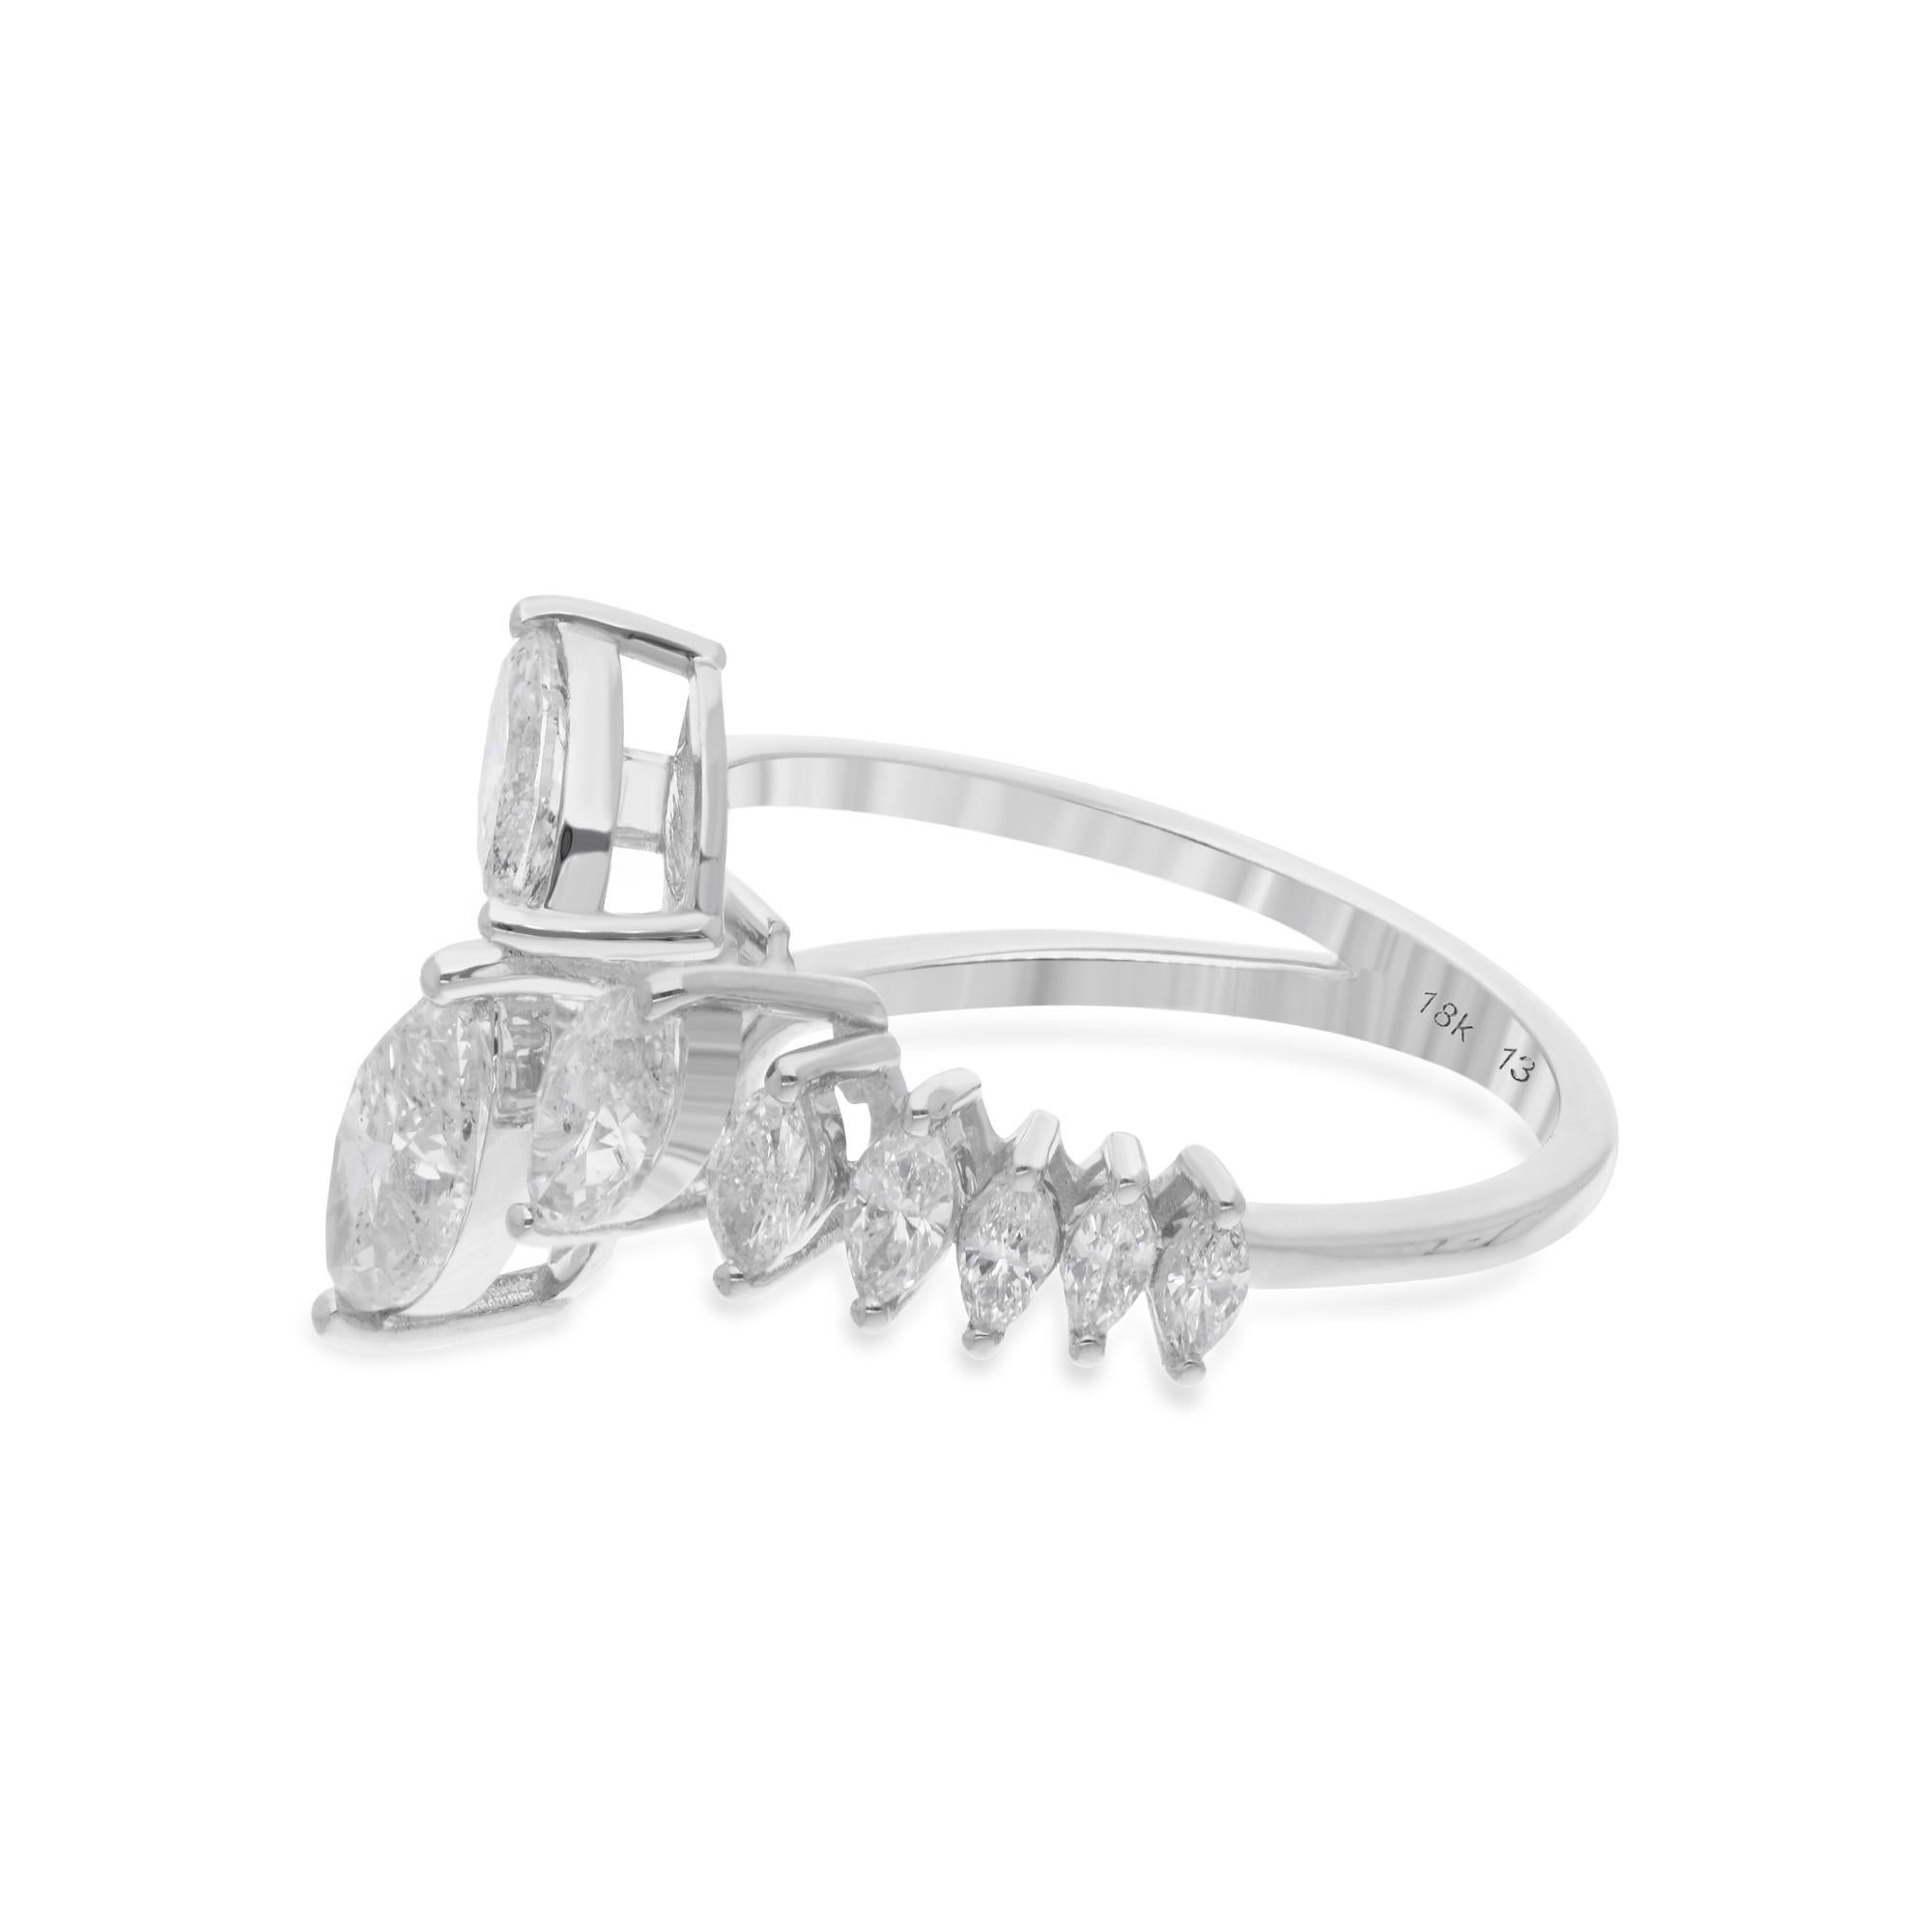 Indulge in the epitome of sophistication and luxury with the Natural 1.81 Carat Marquise Shape Diamond Cuff Ring, meticulously crafted in exquisite 18 Karat White Gold. This stunning ring is a true testament to timeless beauty and refined